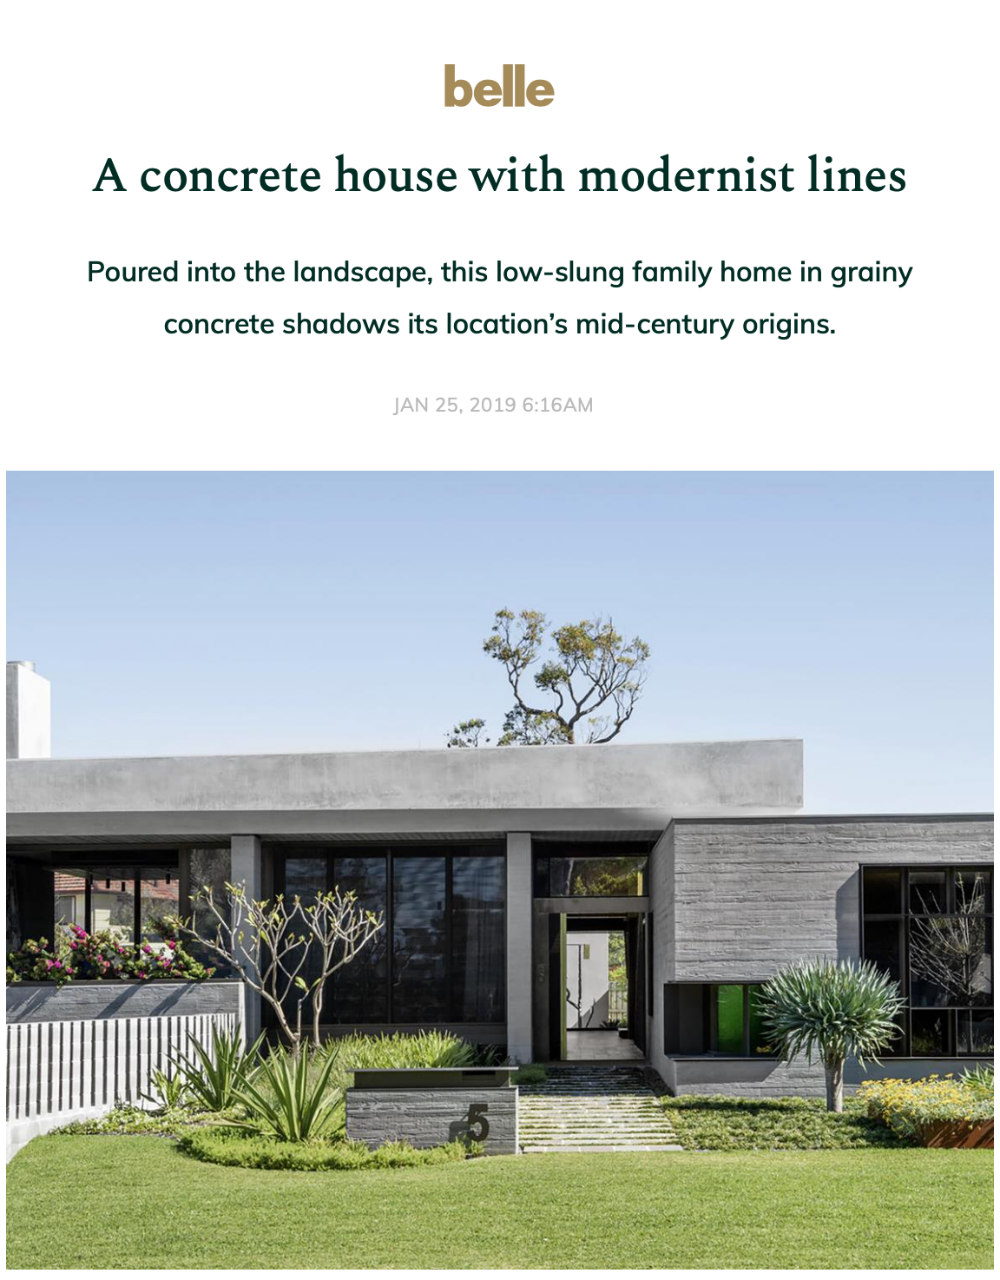 A Concrete House with Modernist Lines (Belle Magazine)